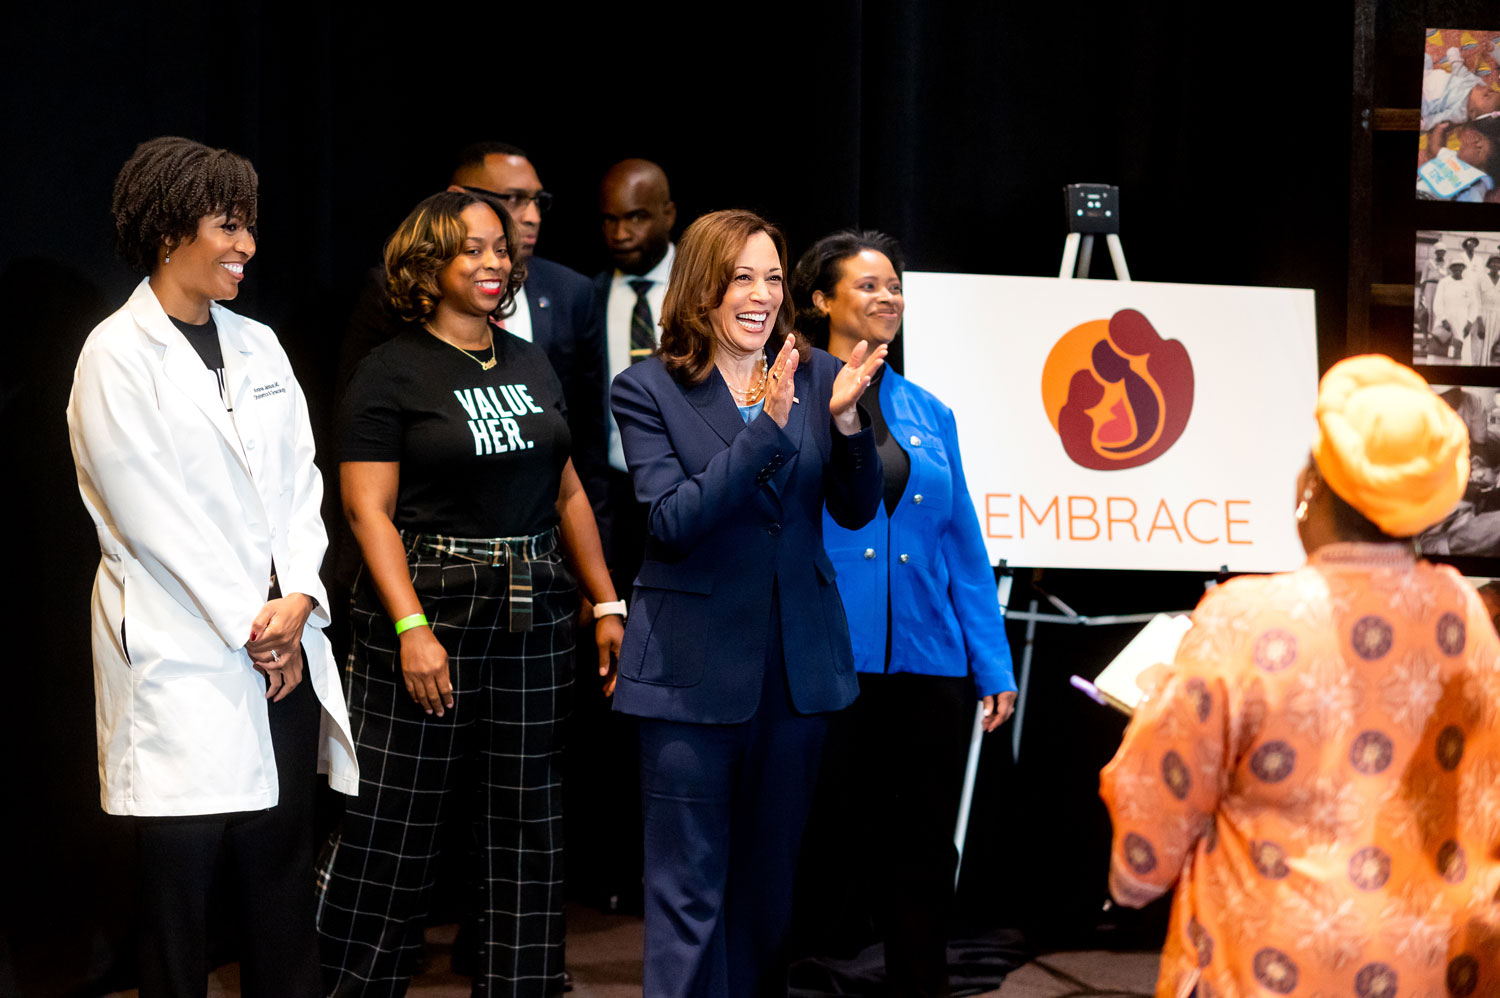 Vice President Kamala Harris with Black UCSF staff and faculty members. VP Harris is in the center, clapping. On the right-hand side is a sign with the orange EMBRACE logo